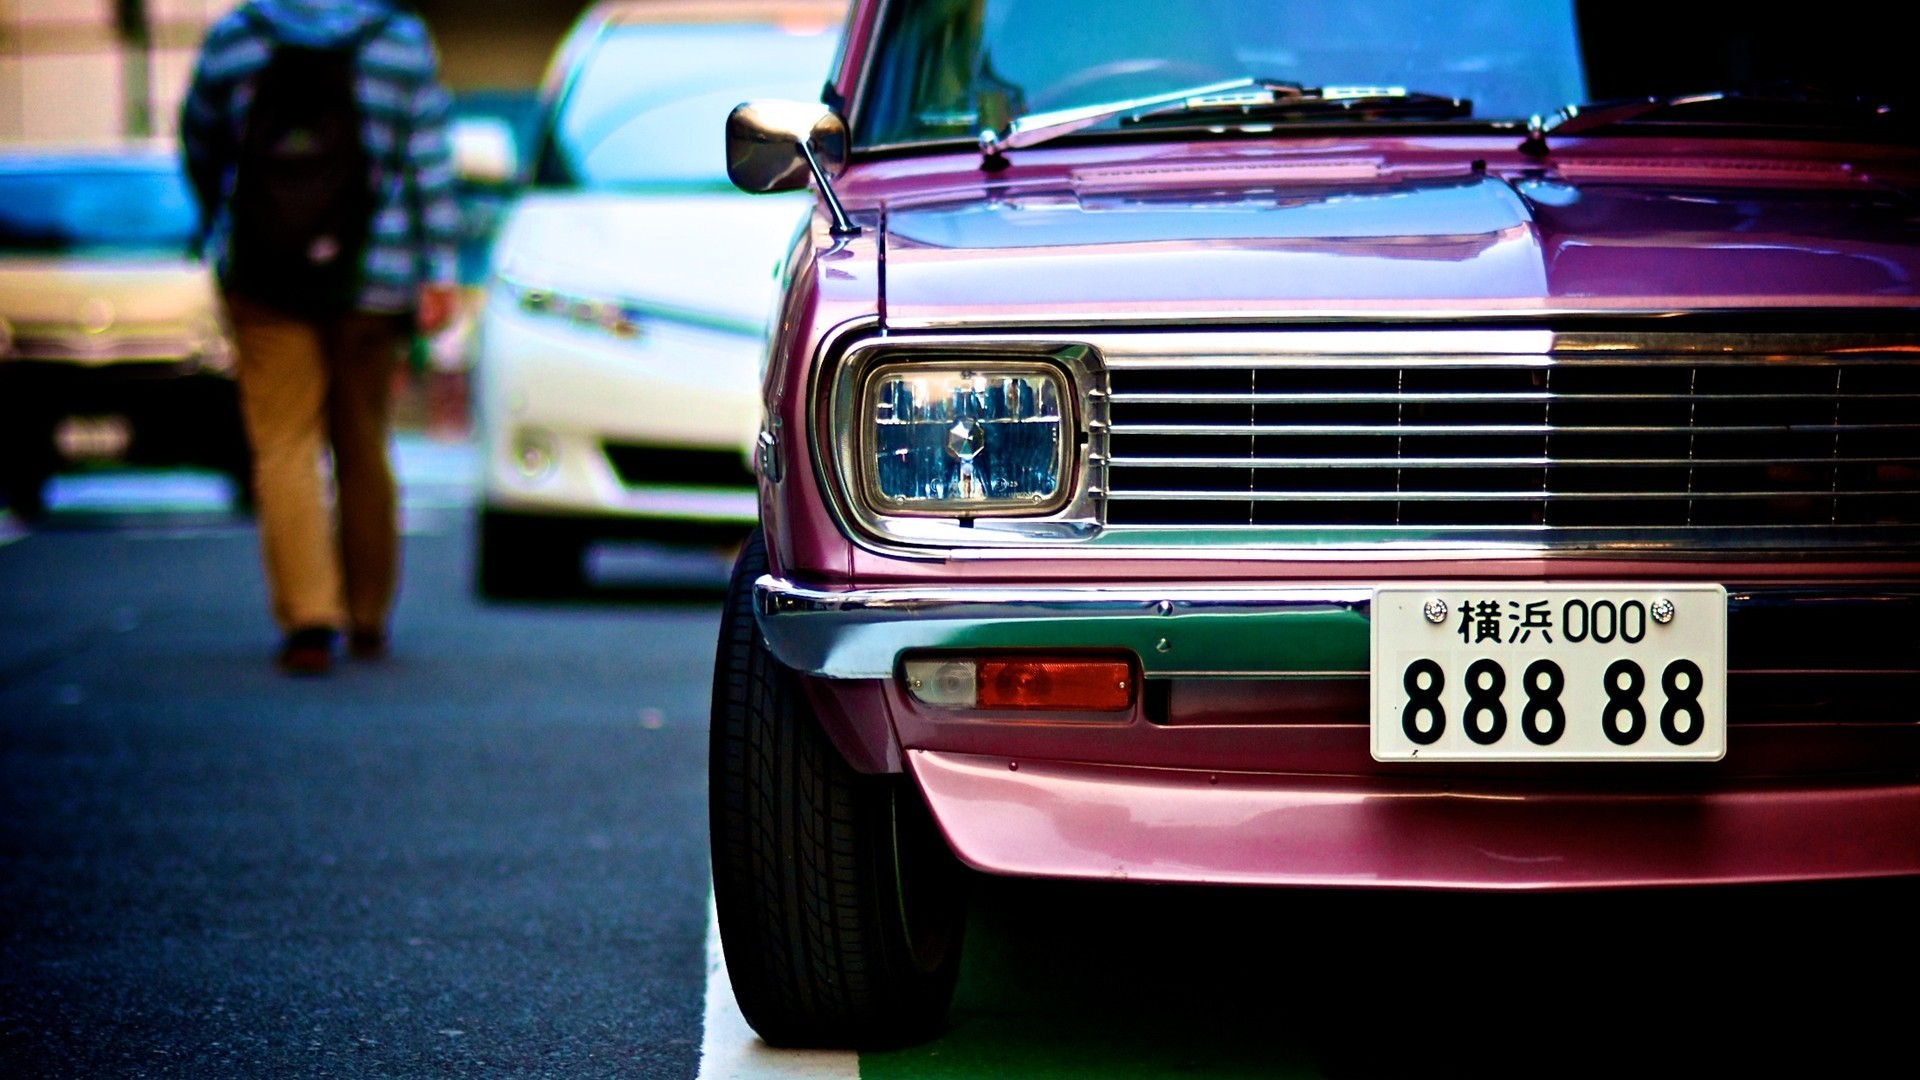 General 1920x1080 car Nissan numbers vehicle Asia pink cars